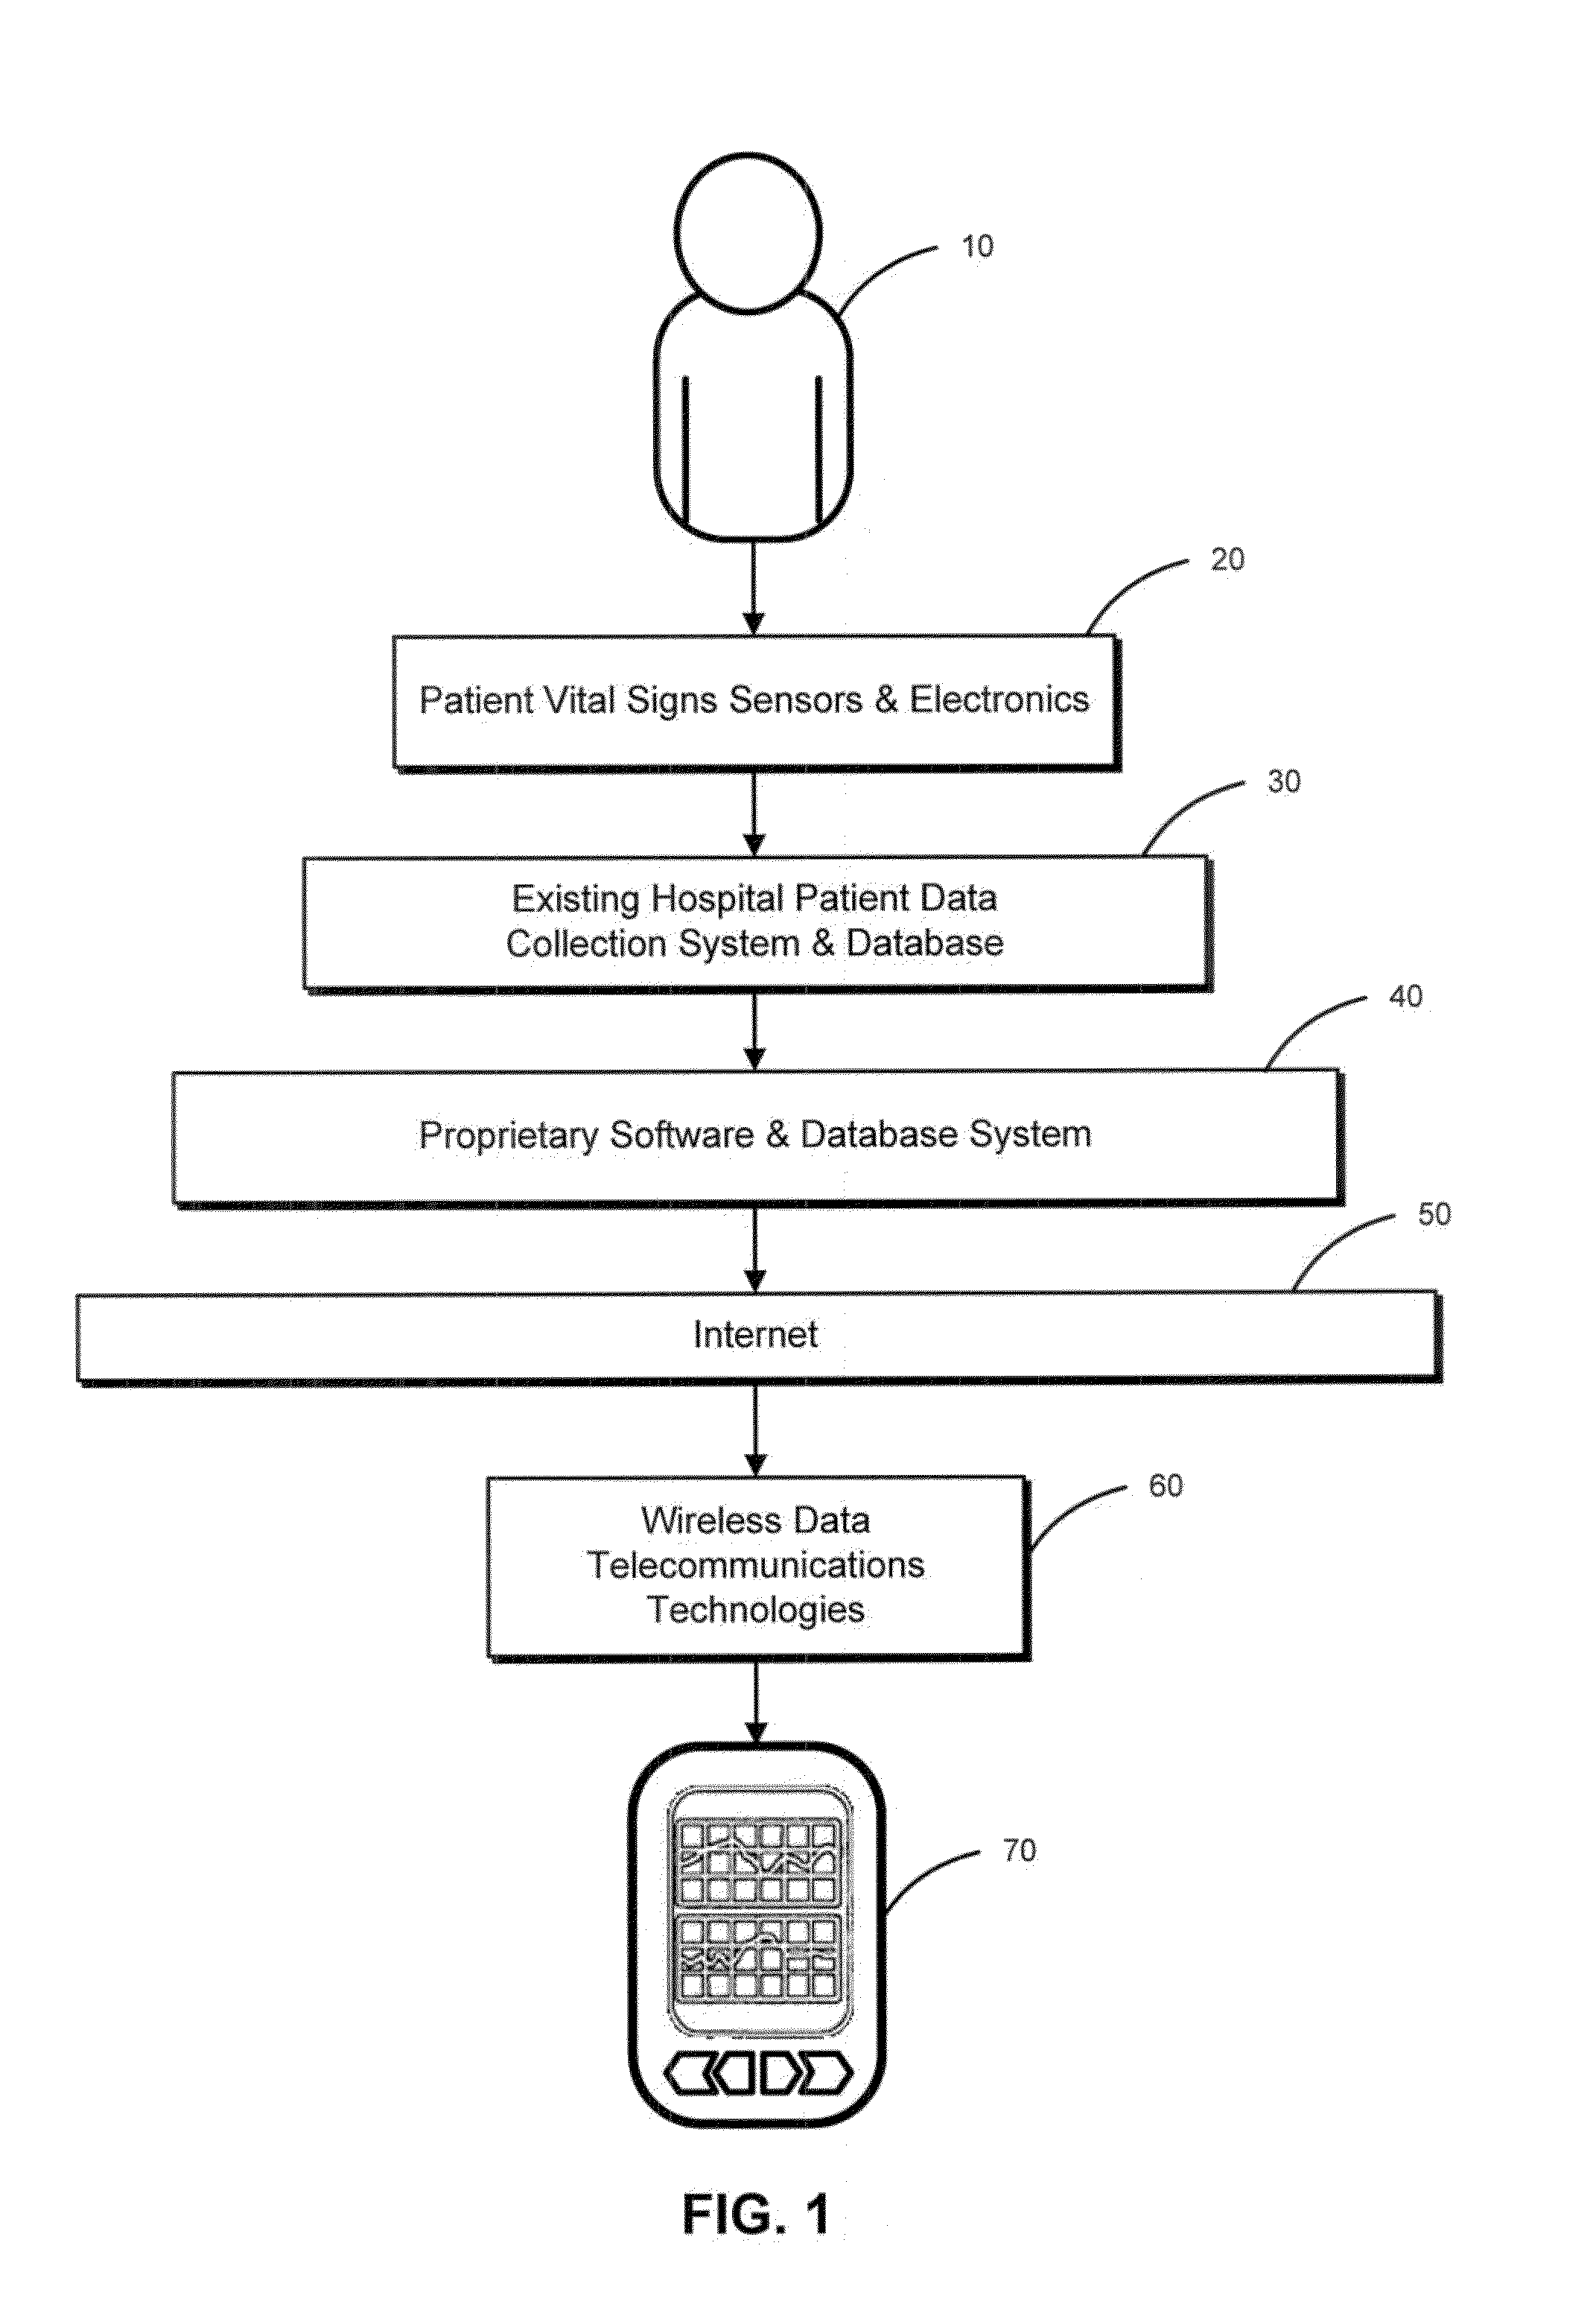 System and method for real time viewing of critical patient data on mobile devices